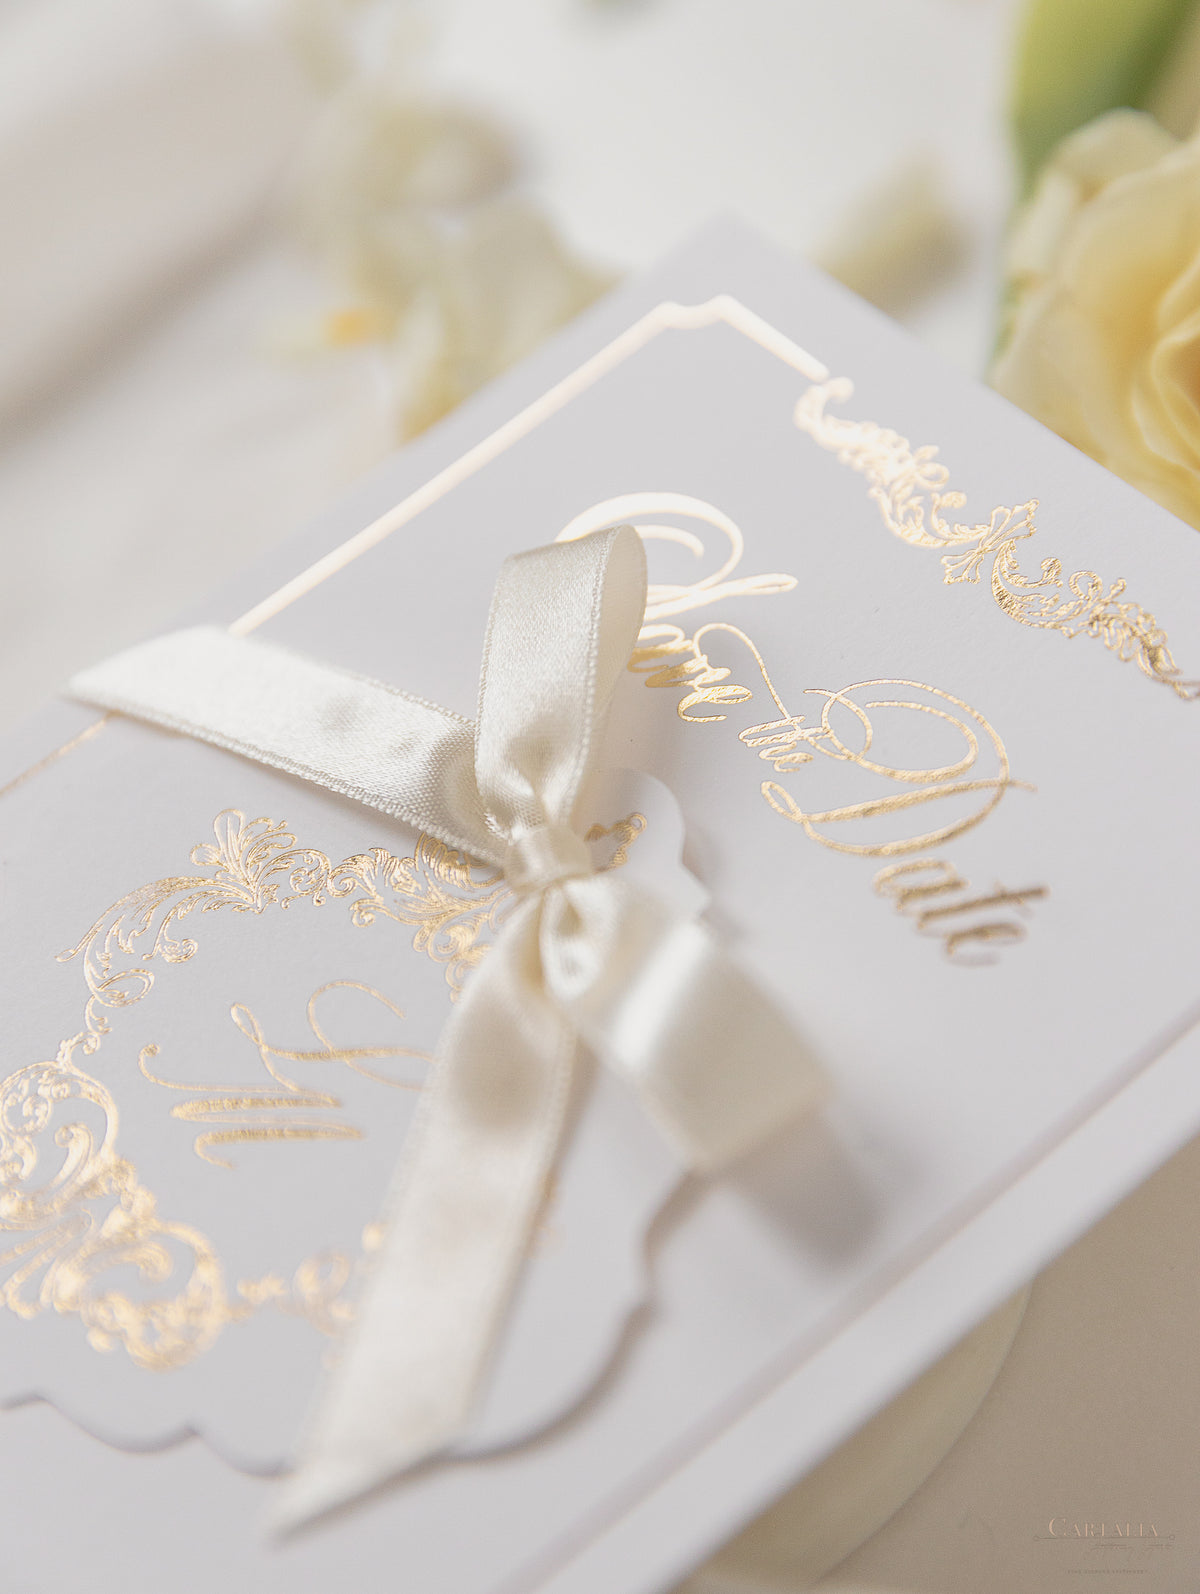 Luxury Gold Foil Card and Tag with Monogram and Satin Ribbon Save the Date